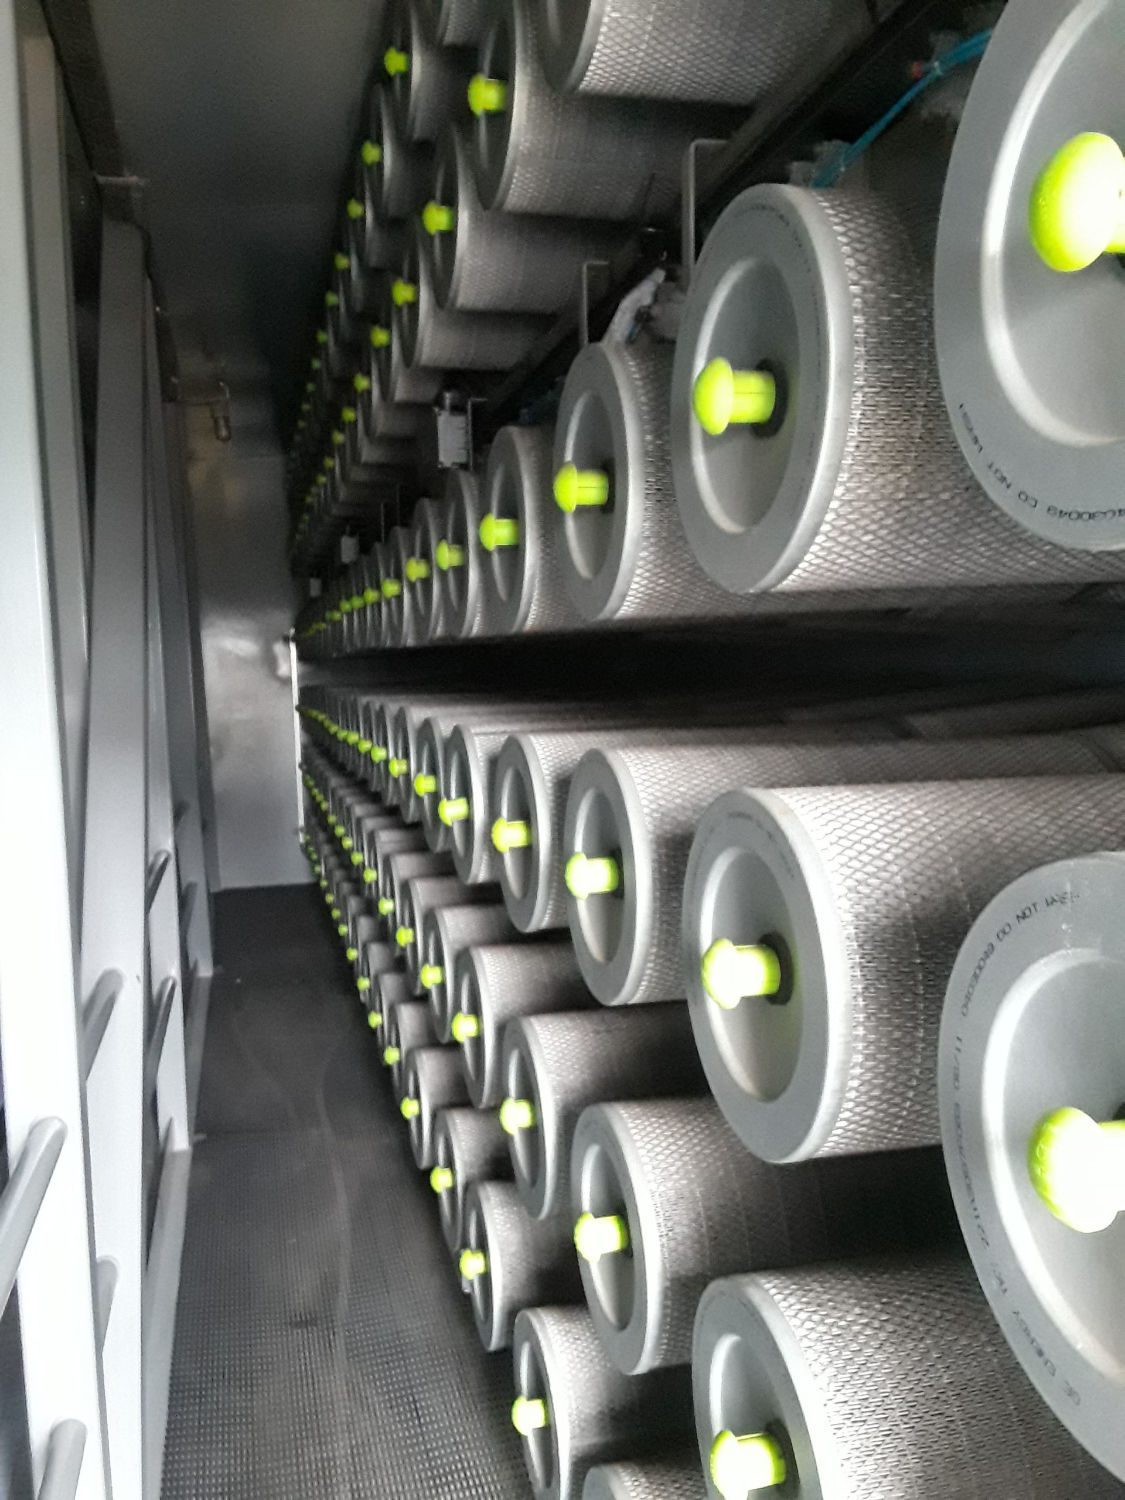 rows of installed cartridge filters